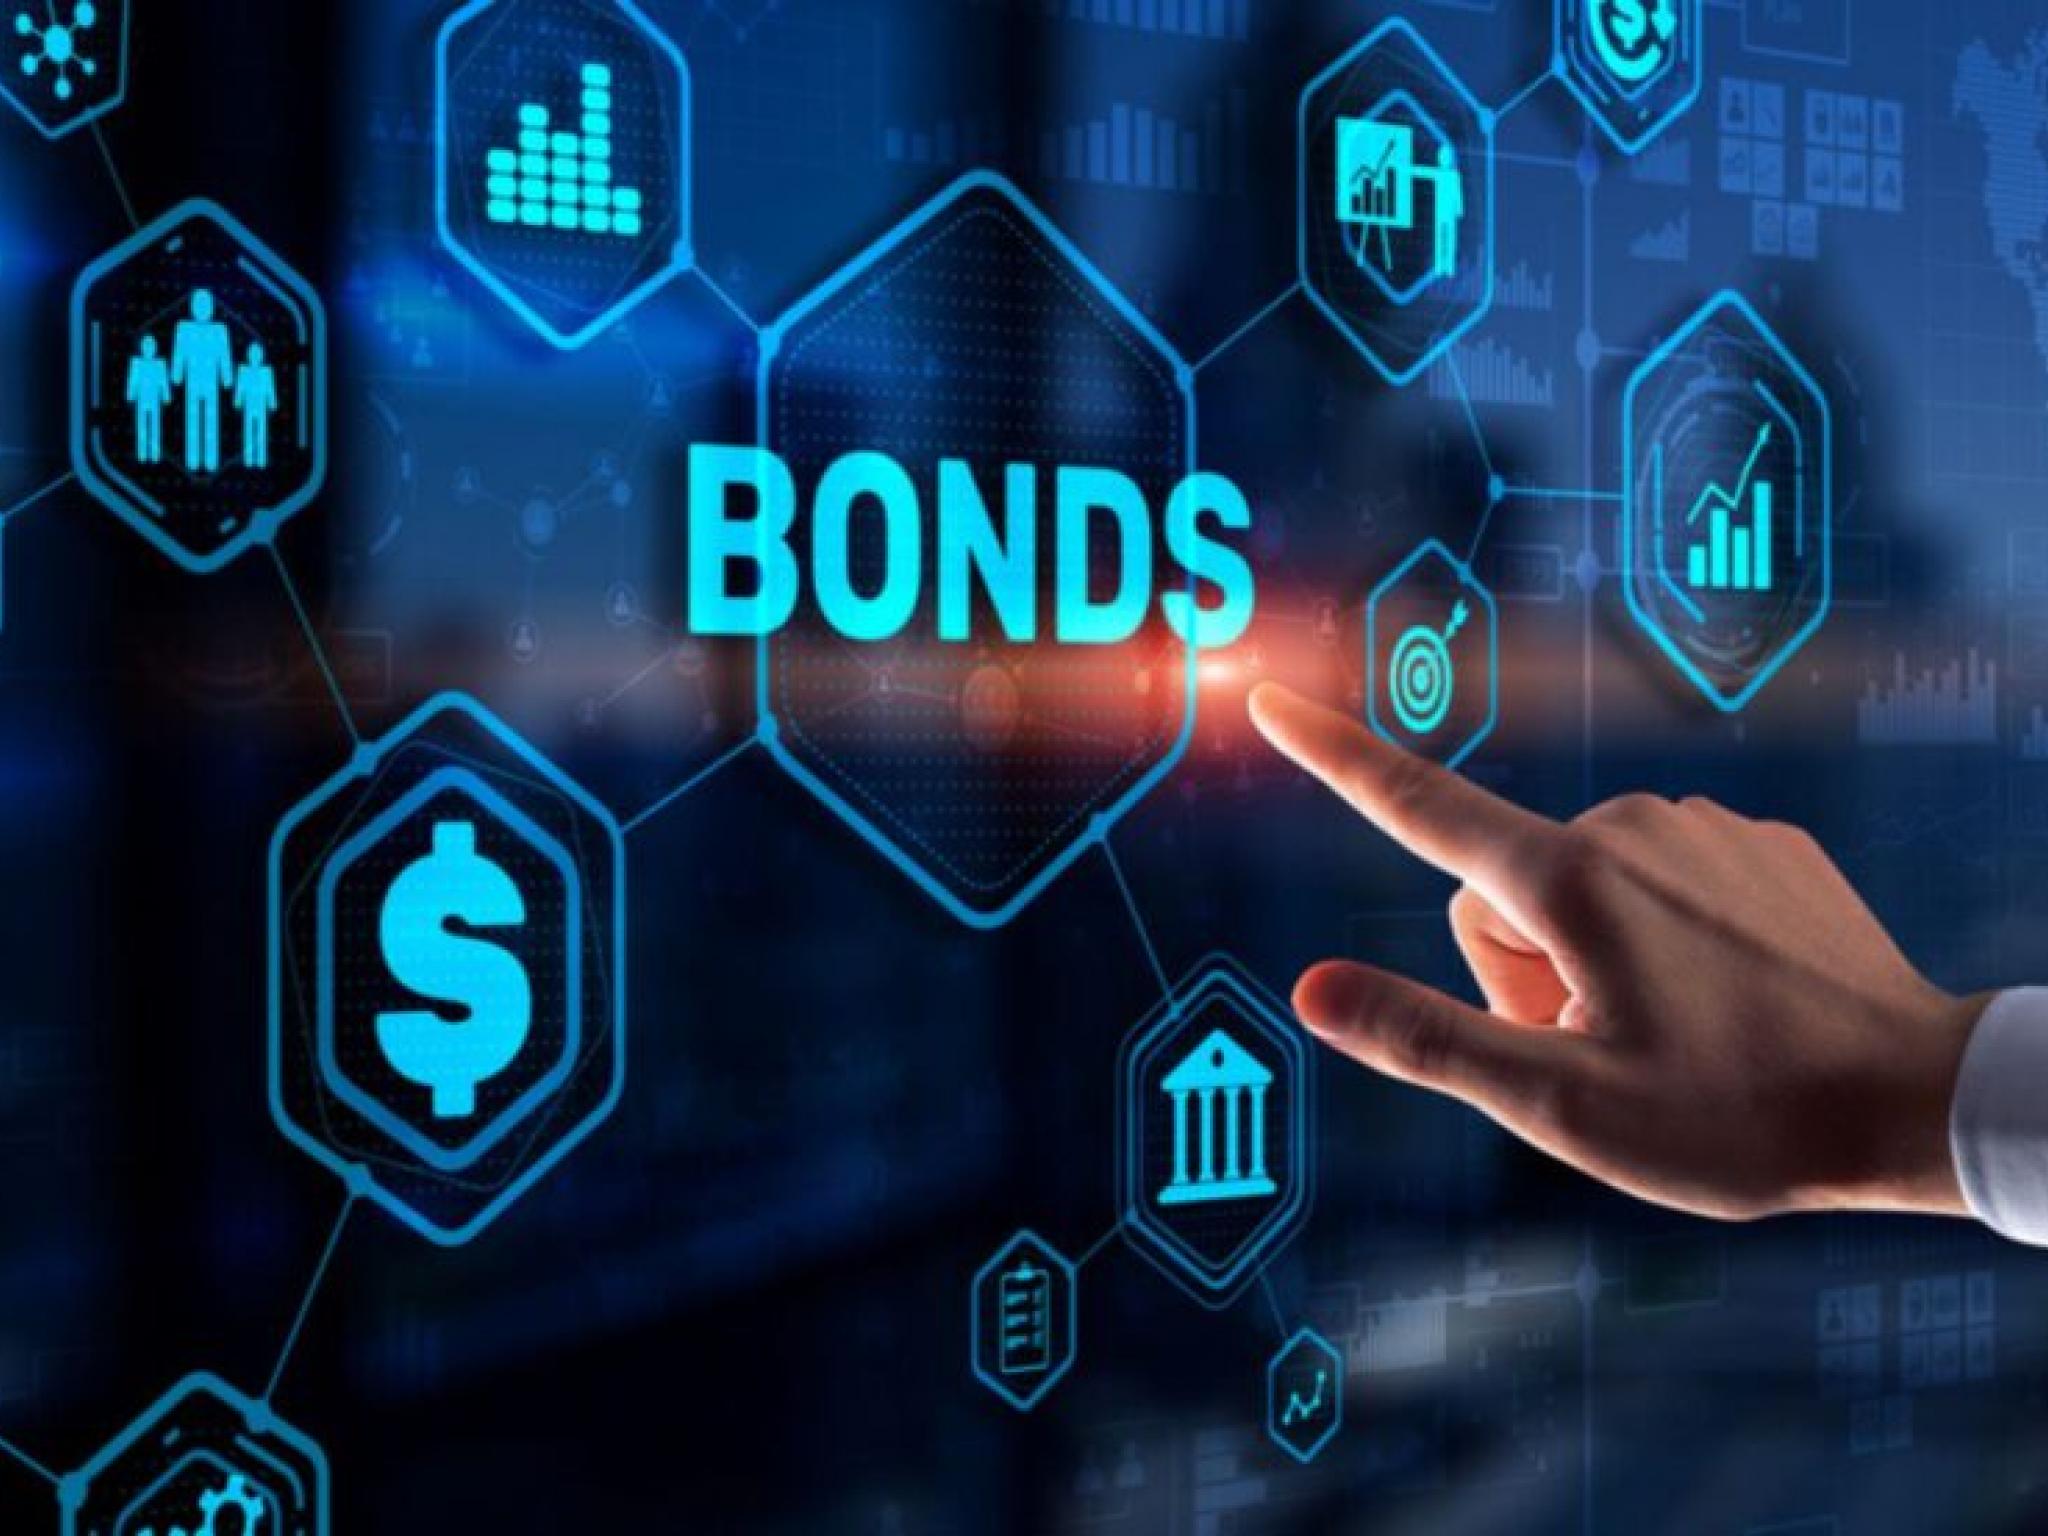  treasury-glut-can-investor-demand-for-us-bonds-keep-pace-with-supply-increases 